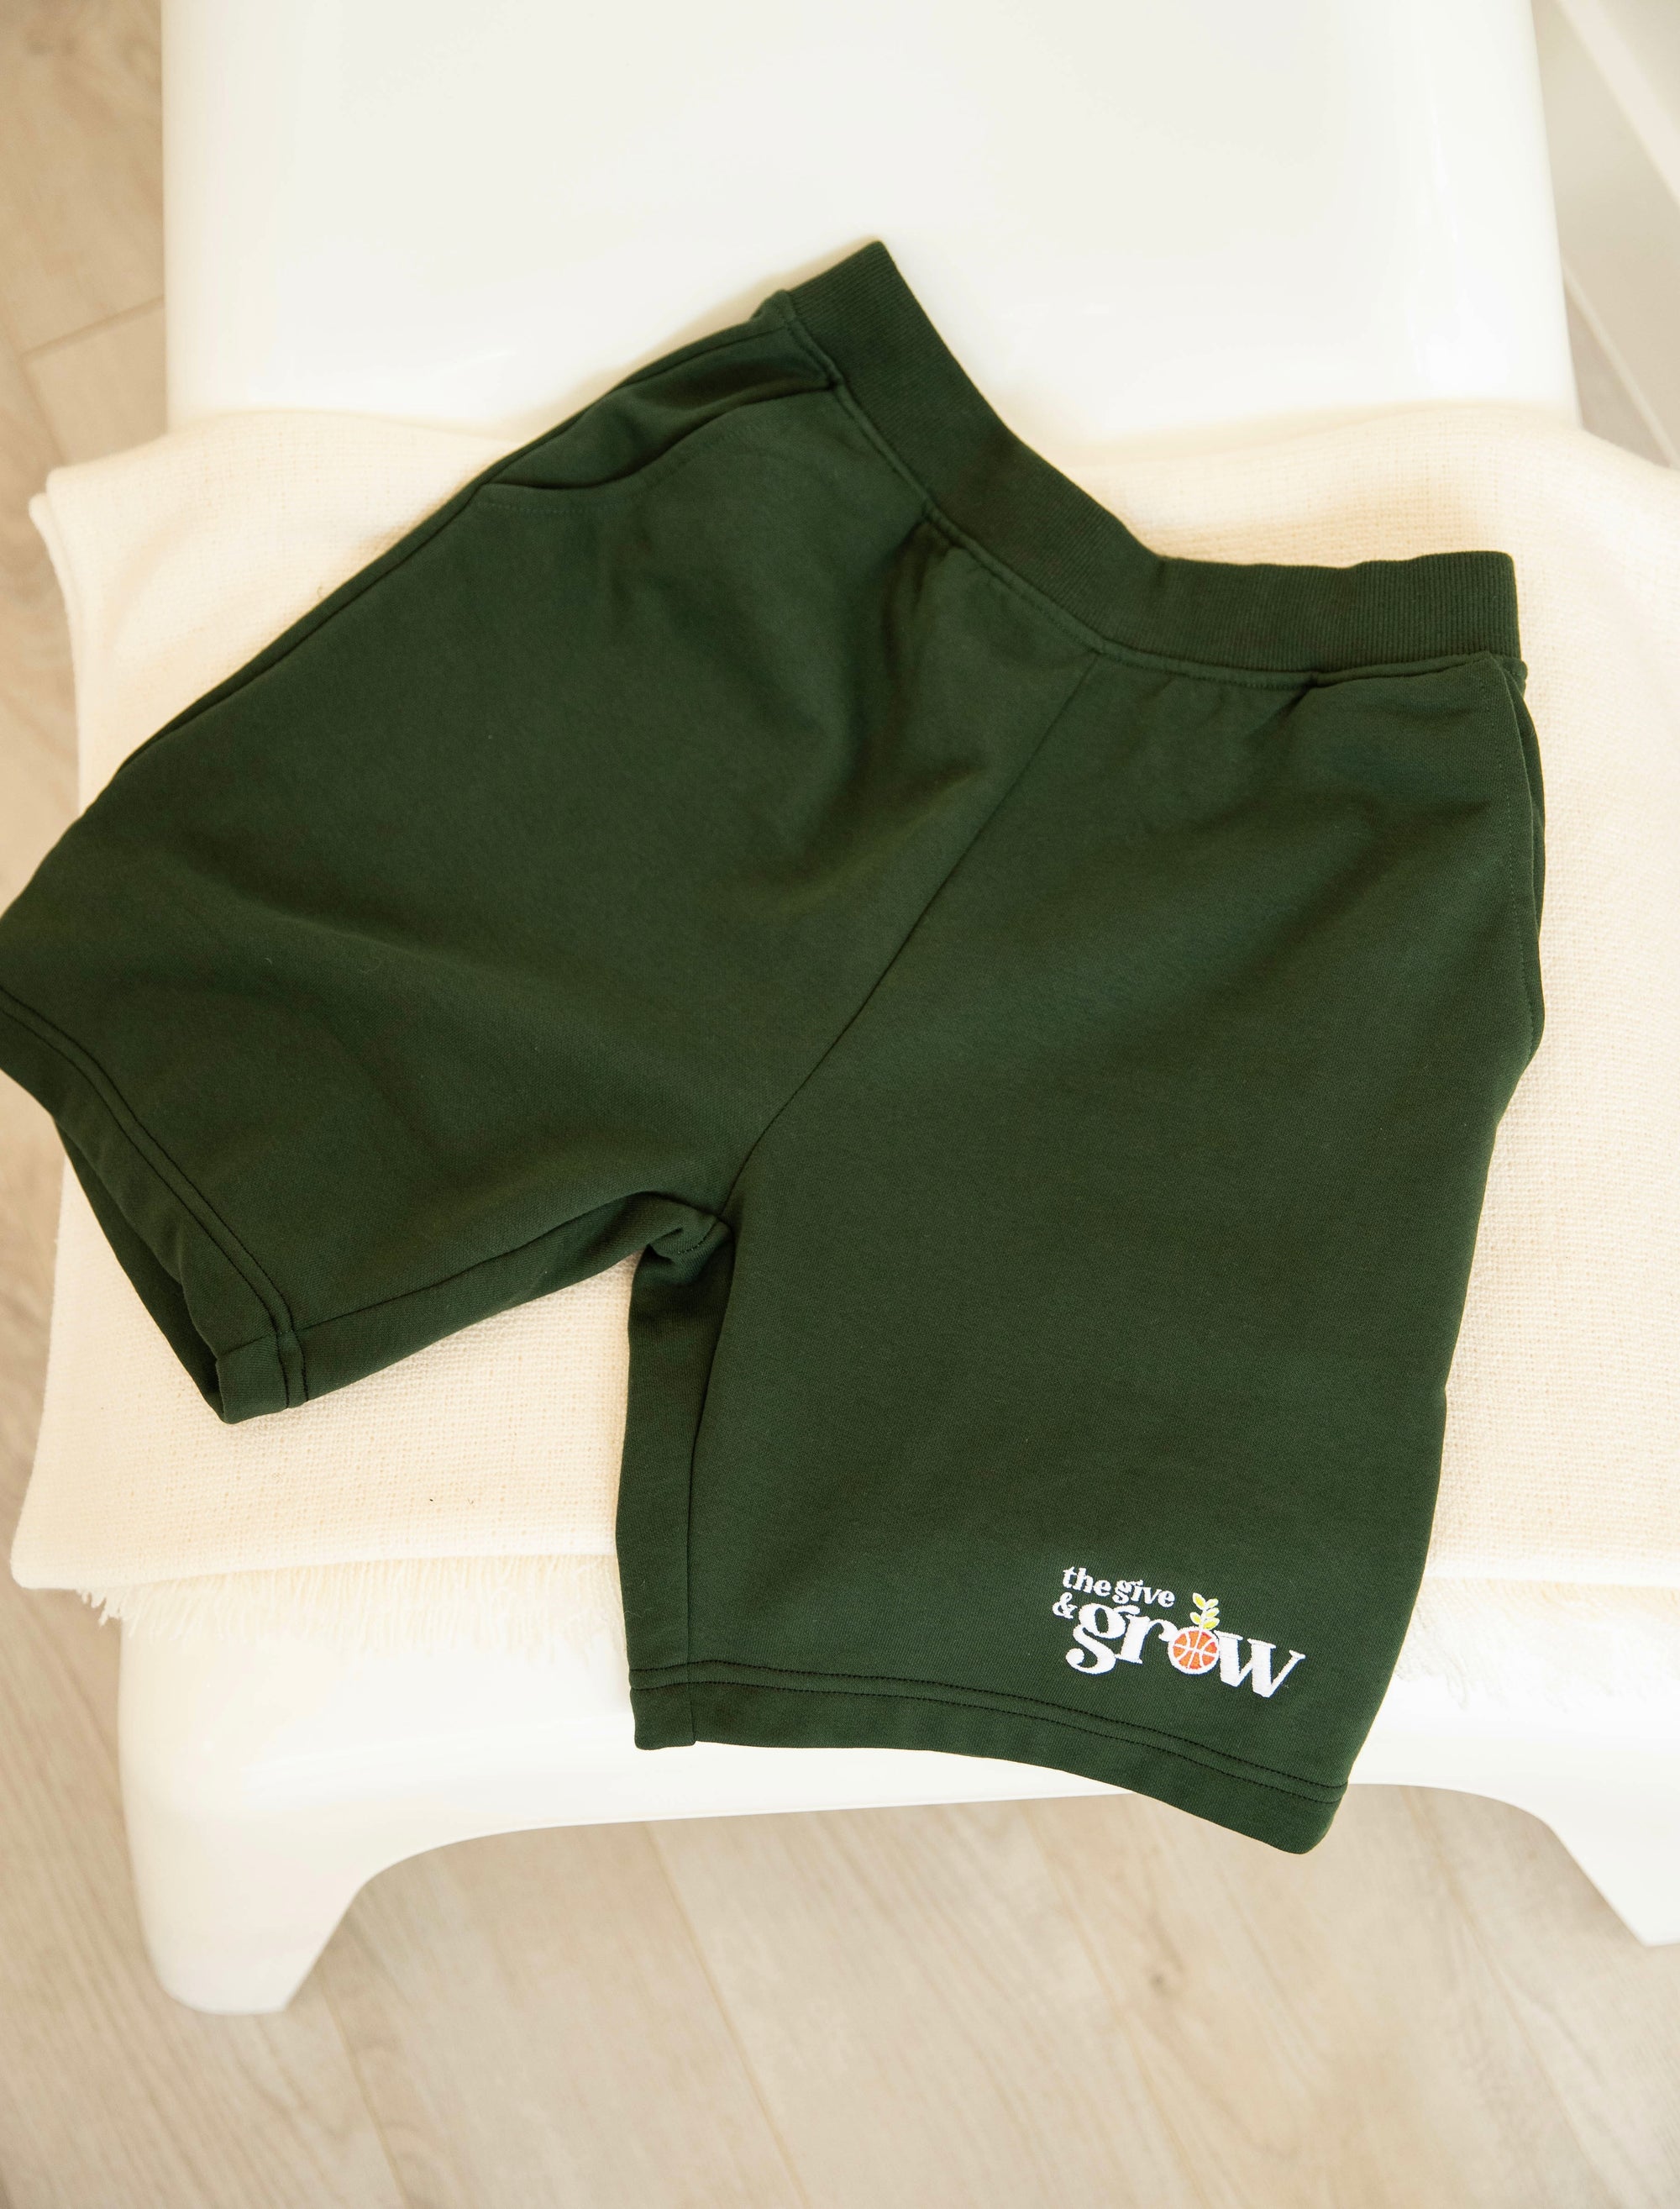 The Give and Grow Embroidered Sweatshorts